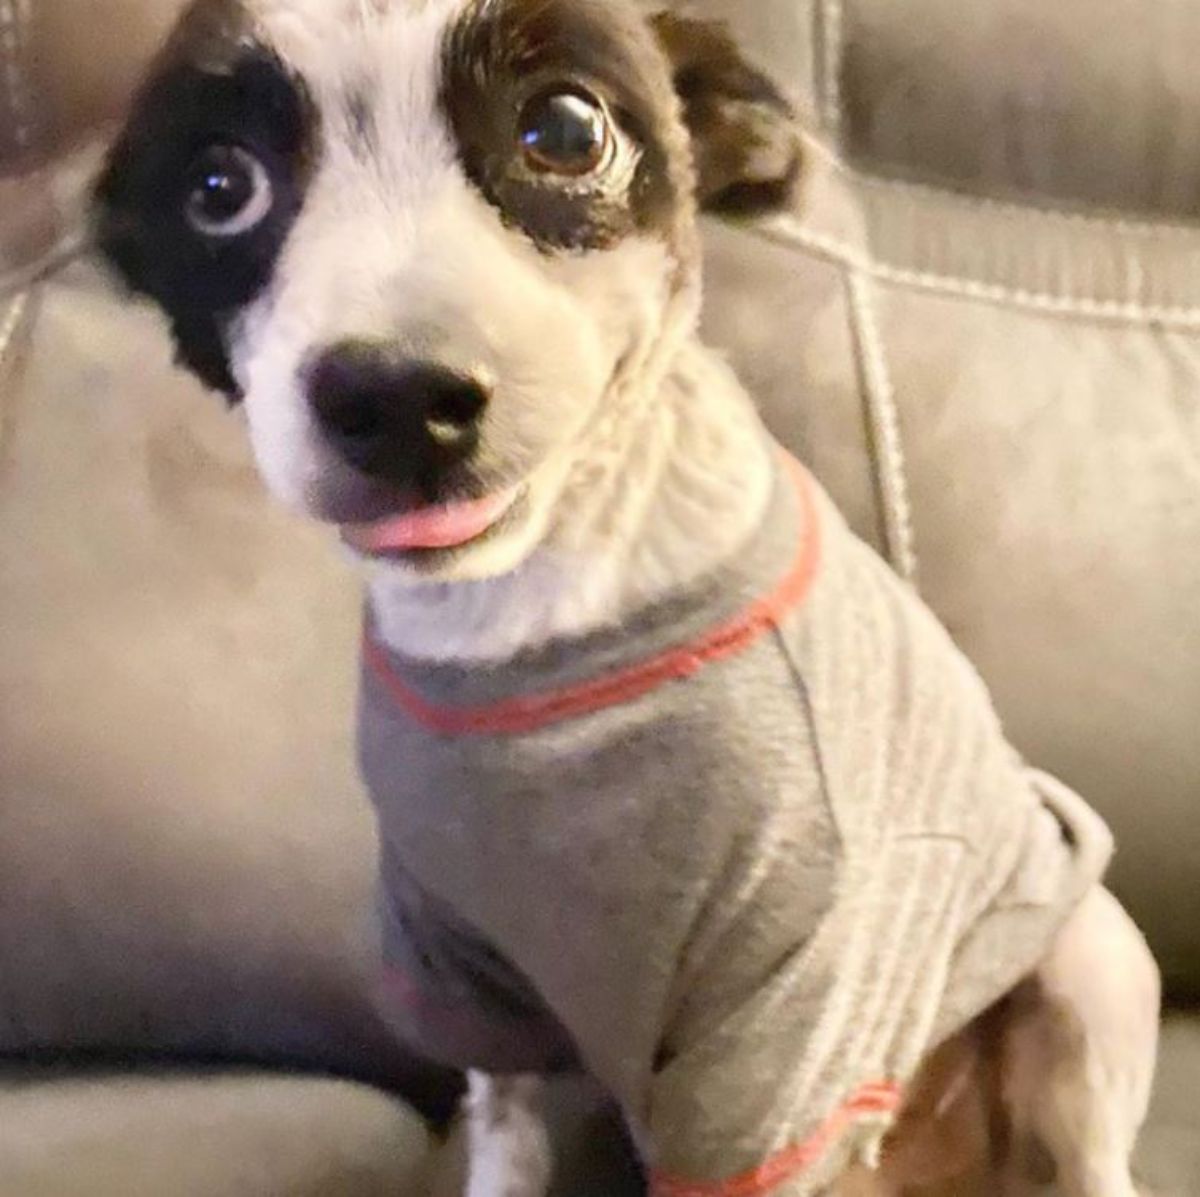 black and white dog who looks like he's smiling sitting on a brown sofa wearing a grey and orange shirt with the tongue sticking out slightly